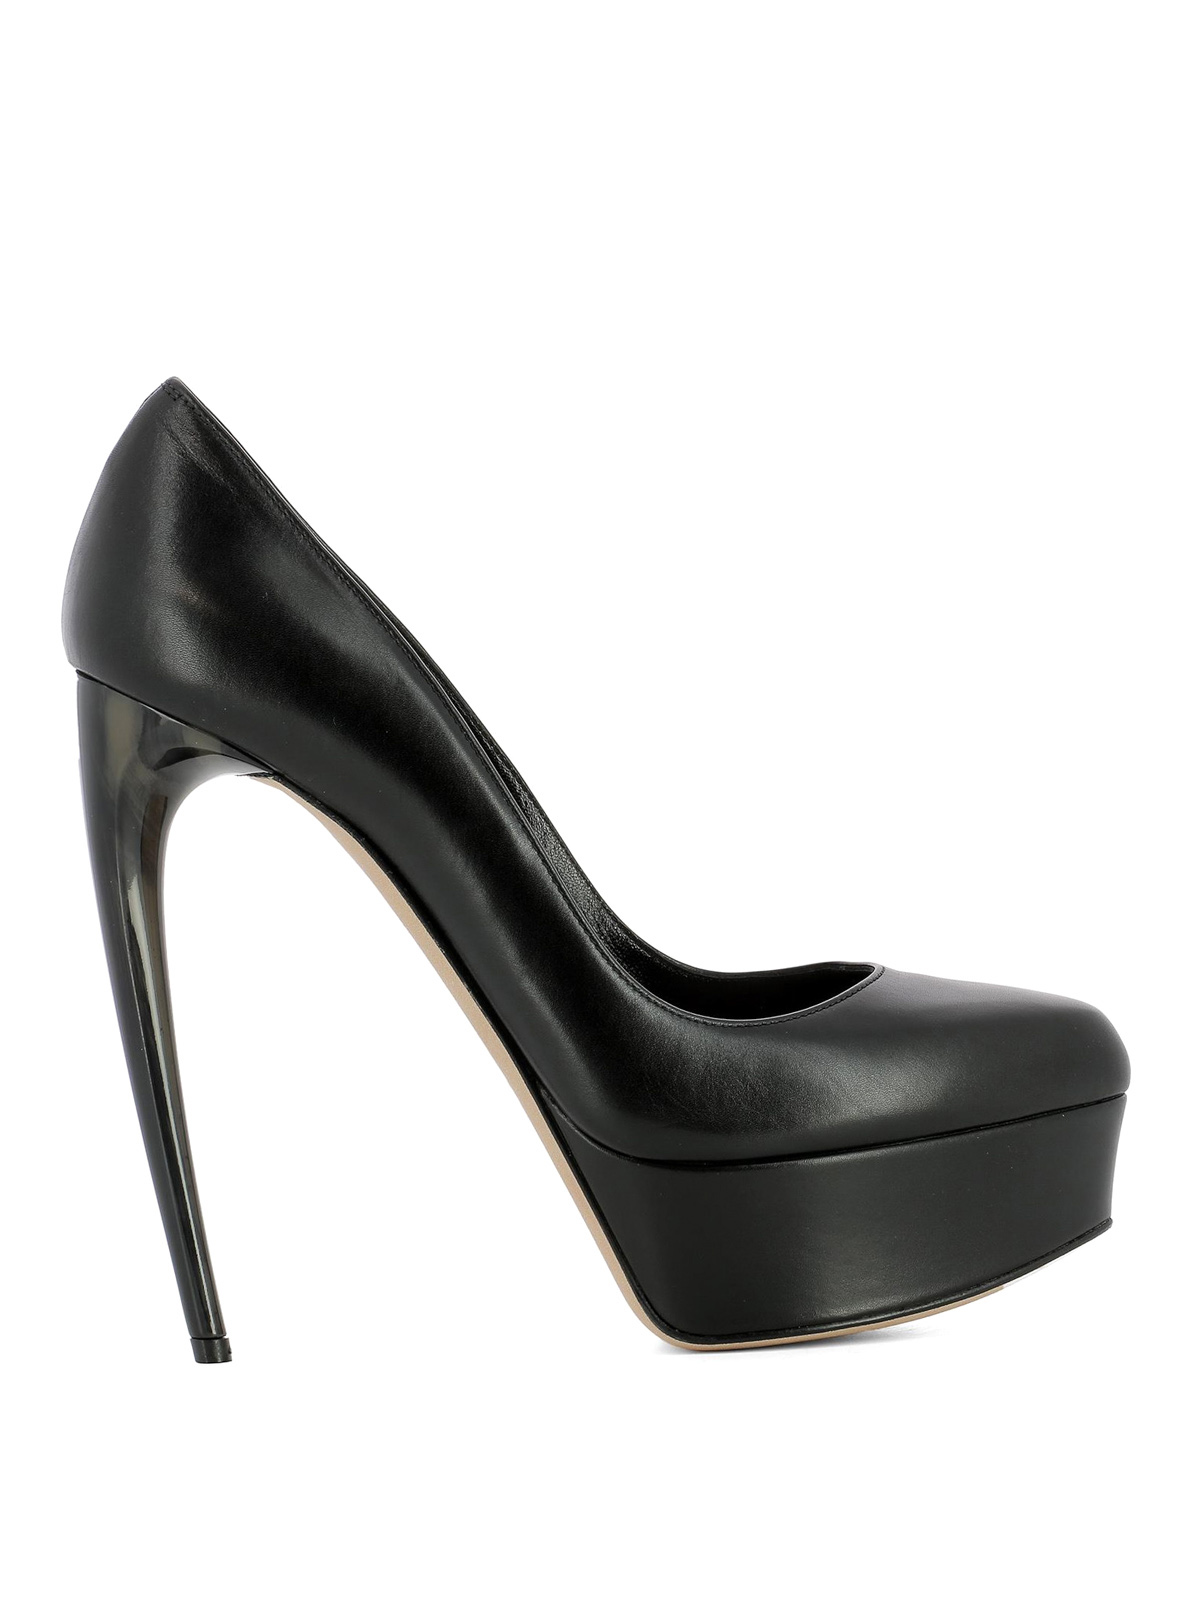 Court shoes Alexander Mcqueen - Curved stiletto heel leather pumps ...